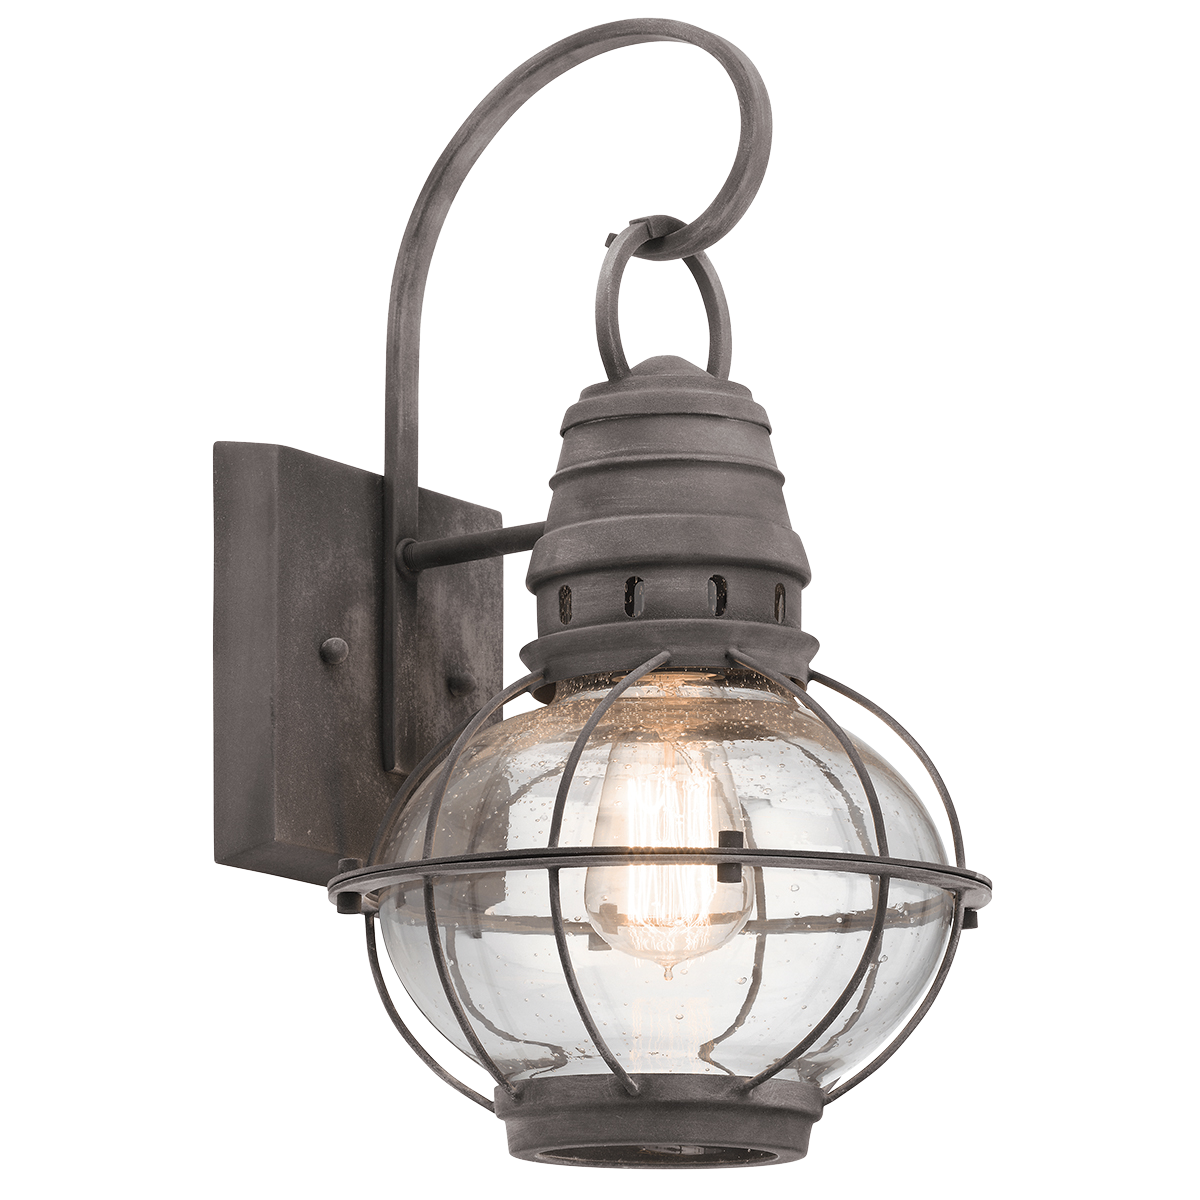 This medium wall lantern from the Bridge Point outdoor collection embodies the classic styling of nautical and railway lighting.  It features a Weathered Zinc finish surrounding Clear Seeded glass.